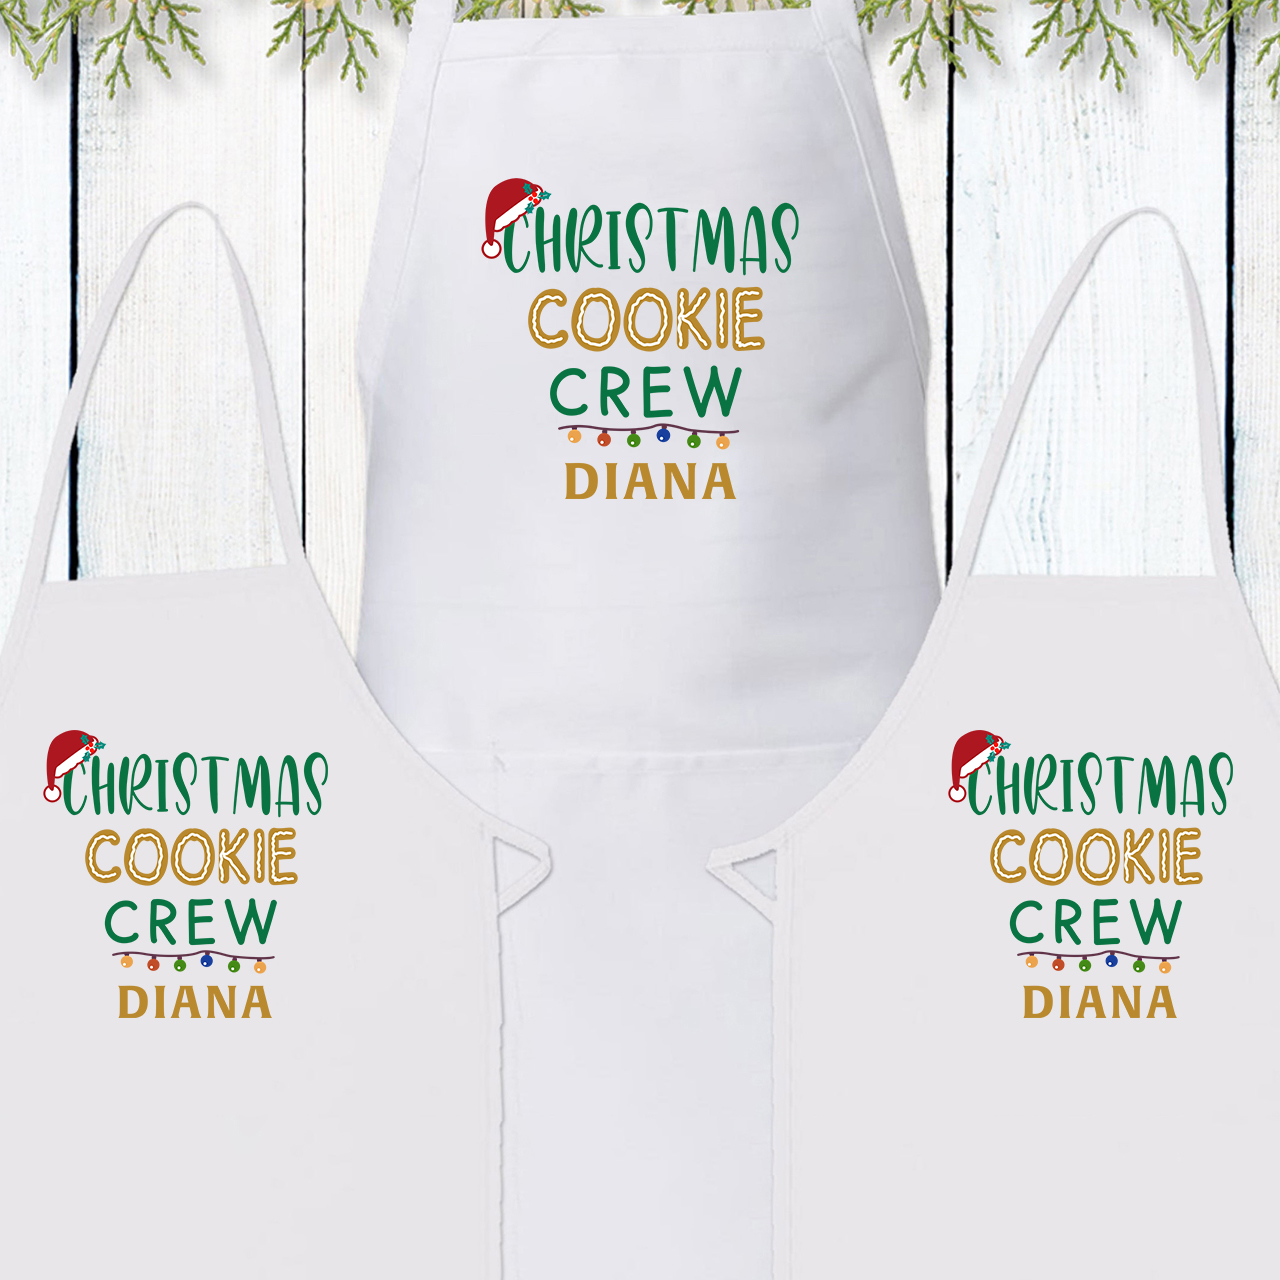 Christmas Cookie Crew Personalized Apron Sets For Adult&Kids